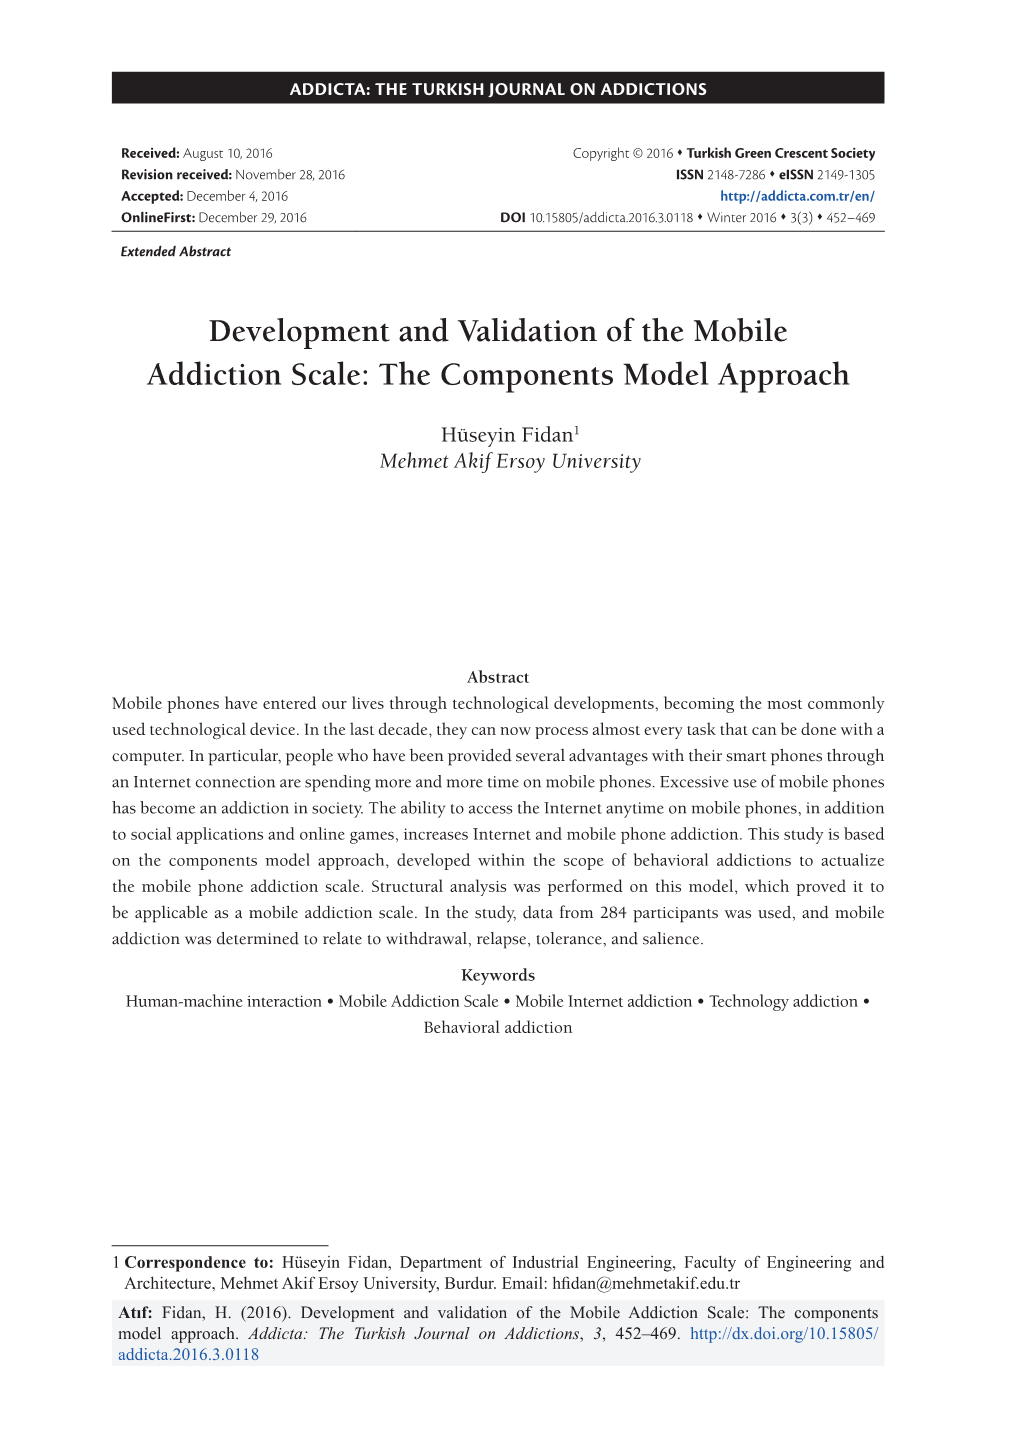 Development and Validation of the Mobile Addiction Scale: the Components Model Approach